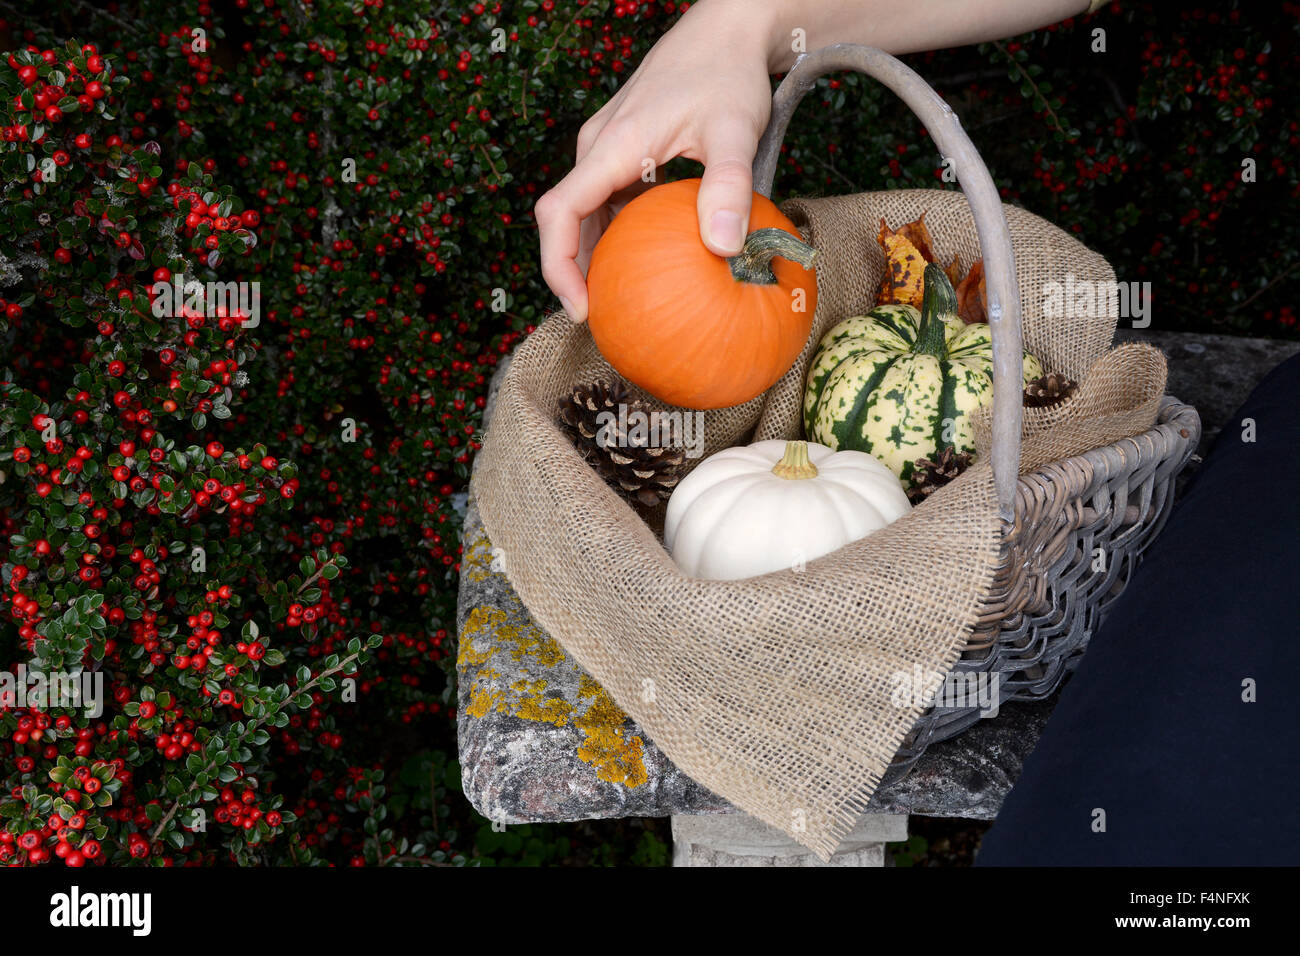 Woman places a small orange sugar pumpkin into her basket of fall gourds on a stone bench Stock Photo